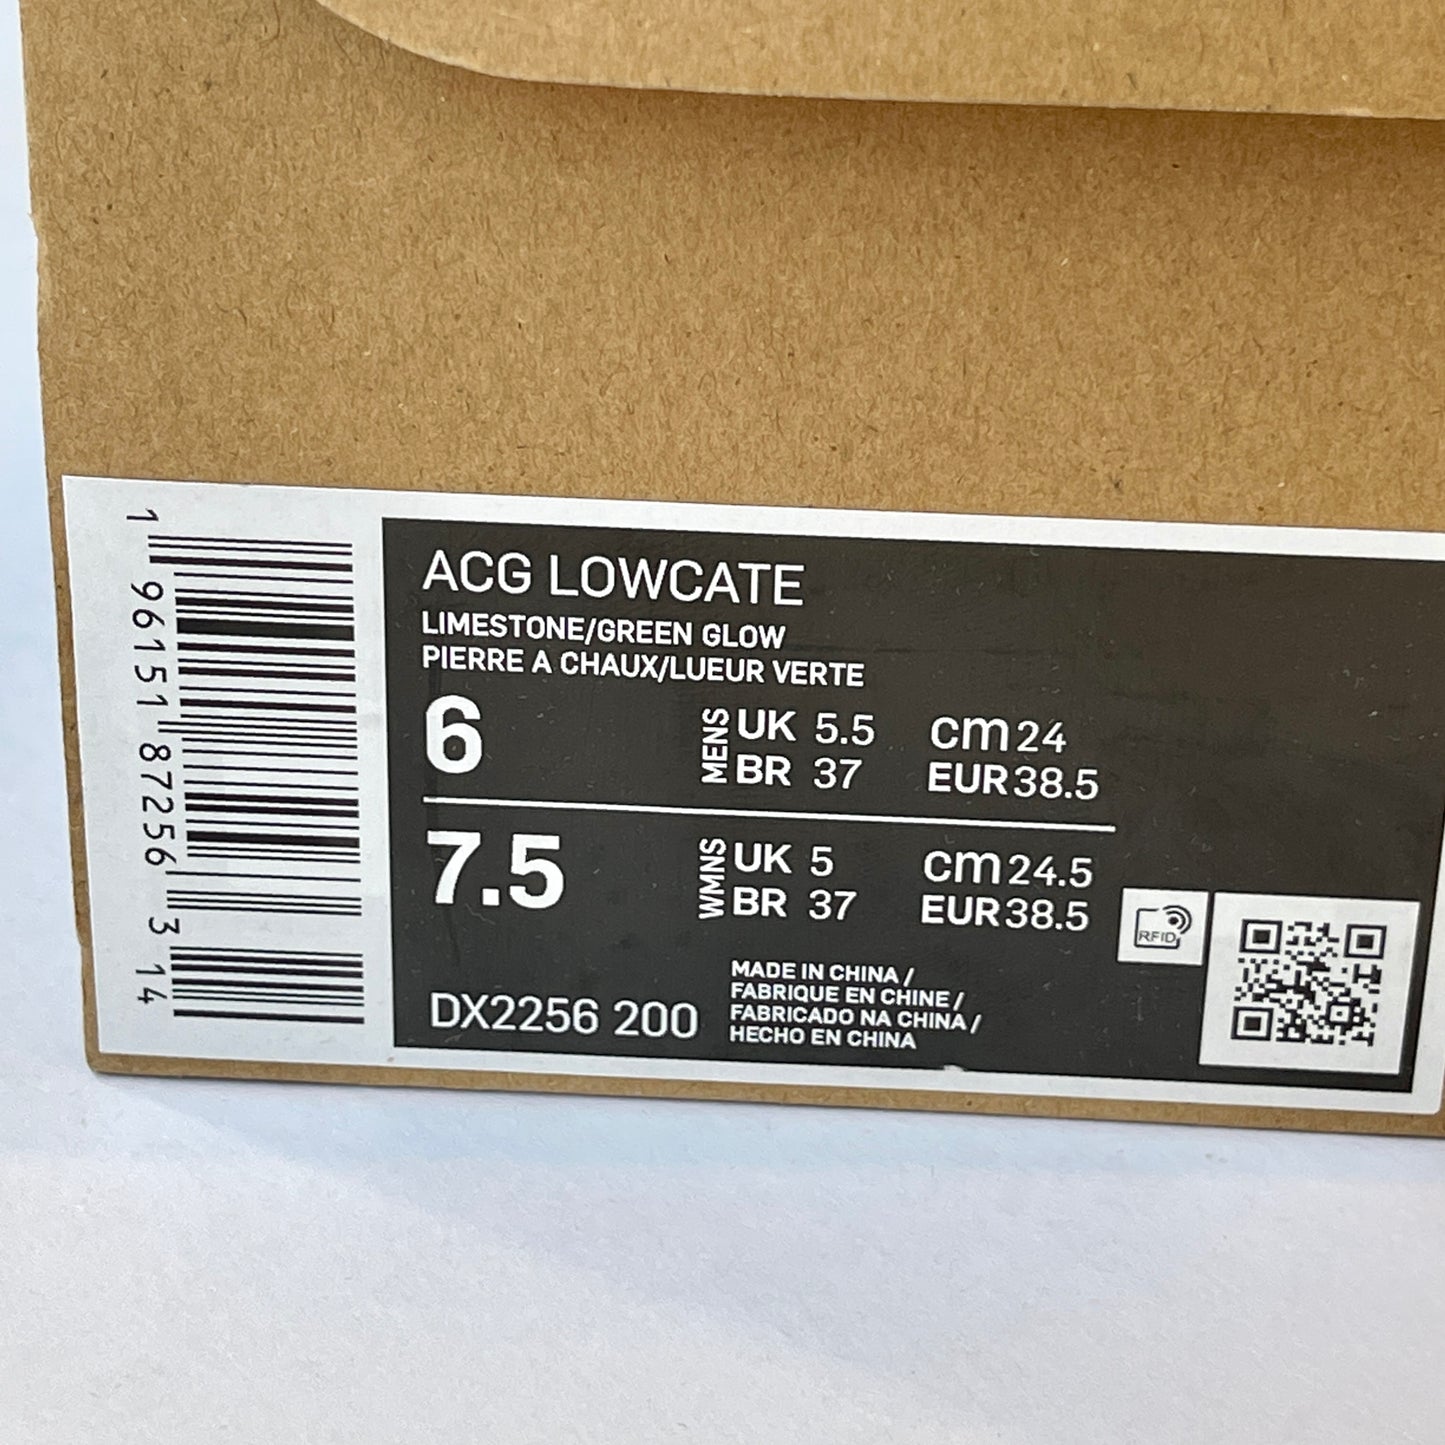 Nike ACG Lowcate Athletic Trail Shoes Unisex Green / Brown